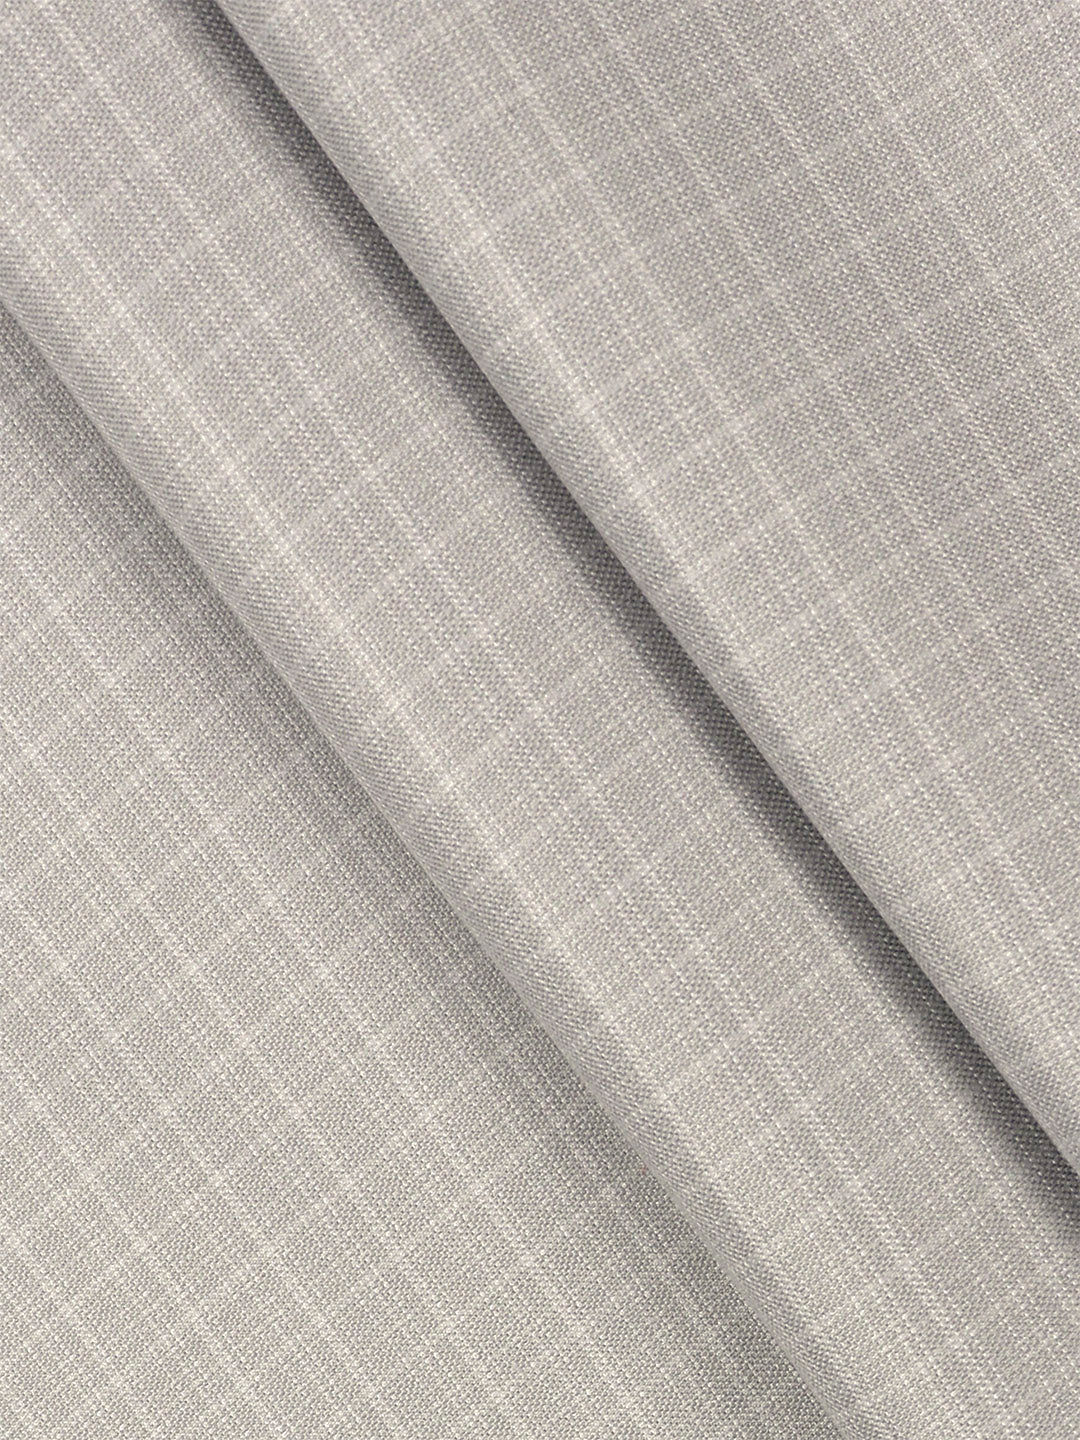 Cotton Checked Smart Elegant Look Grey Suiting Fabric-Icle Stretch